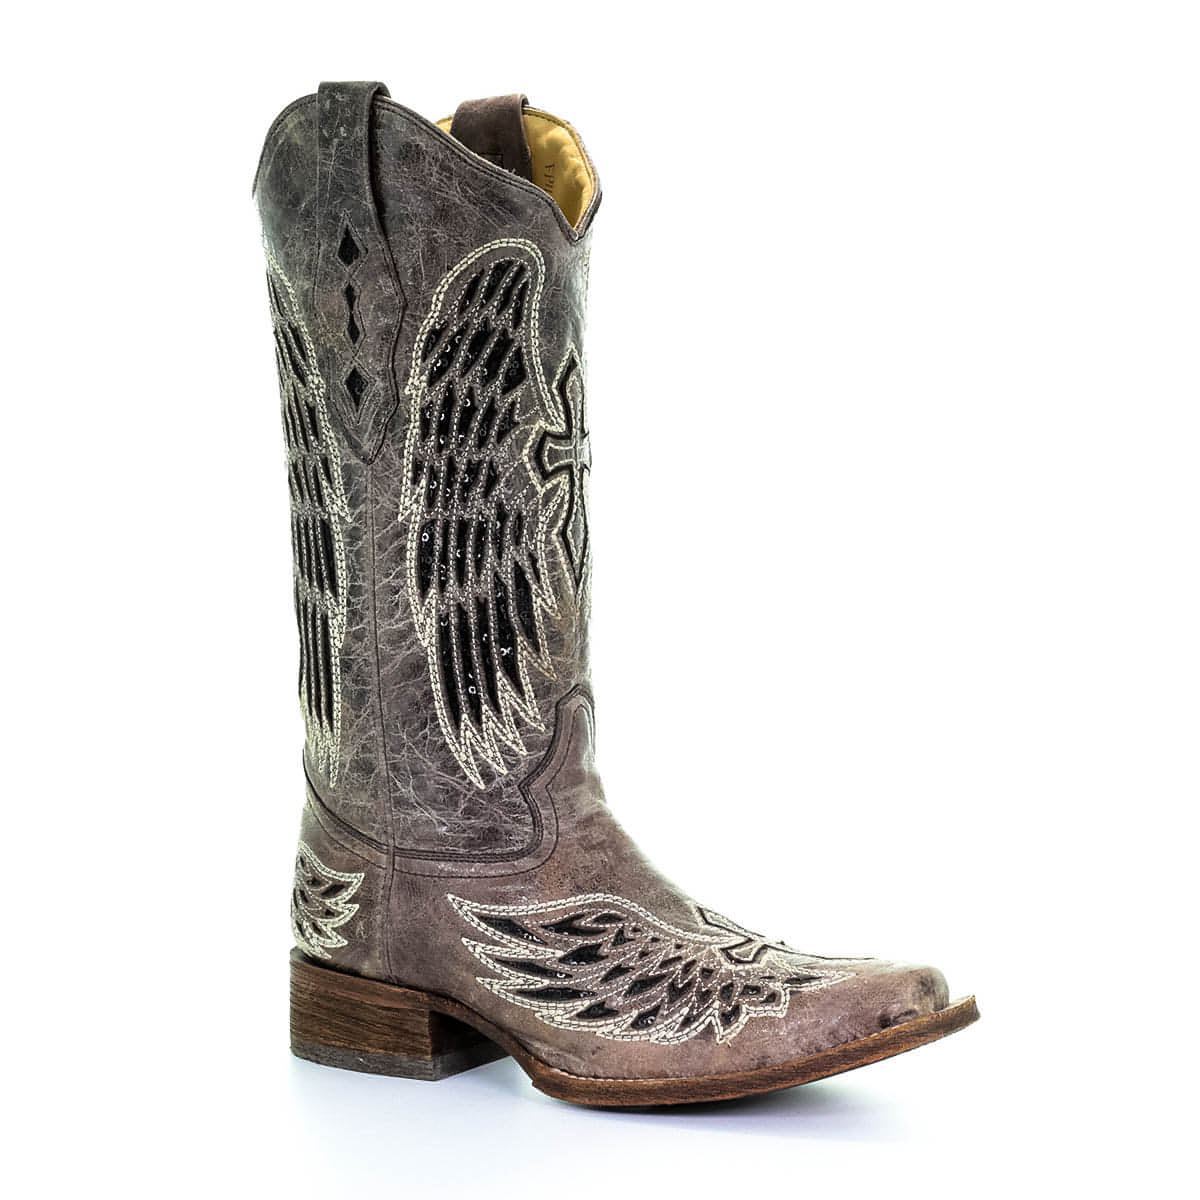 Corral Women's Brown w/Black Wing & Cross Sequence Square Toe Boots-CLEARANCE-NO RETURNS